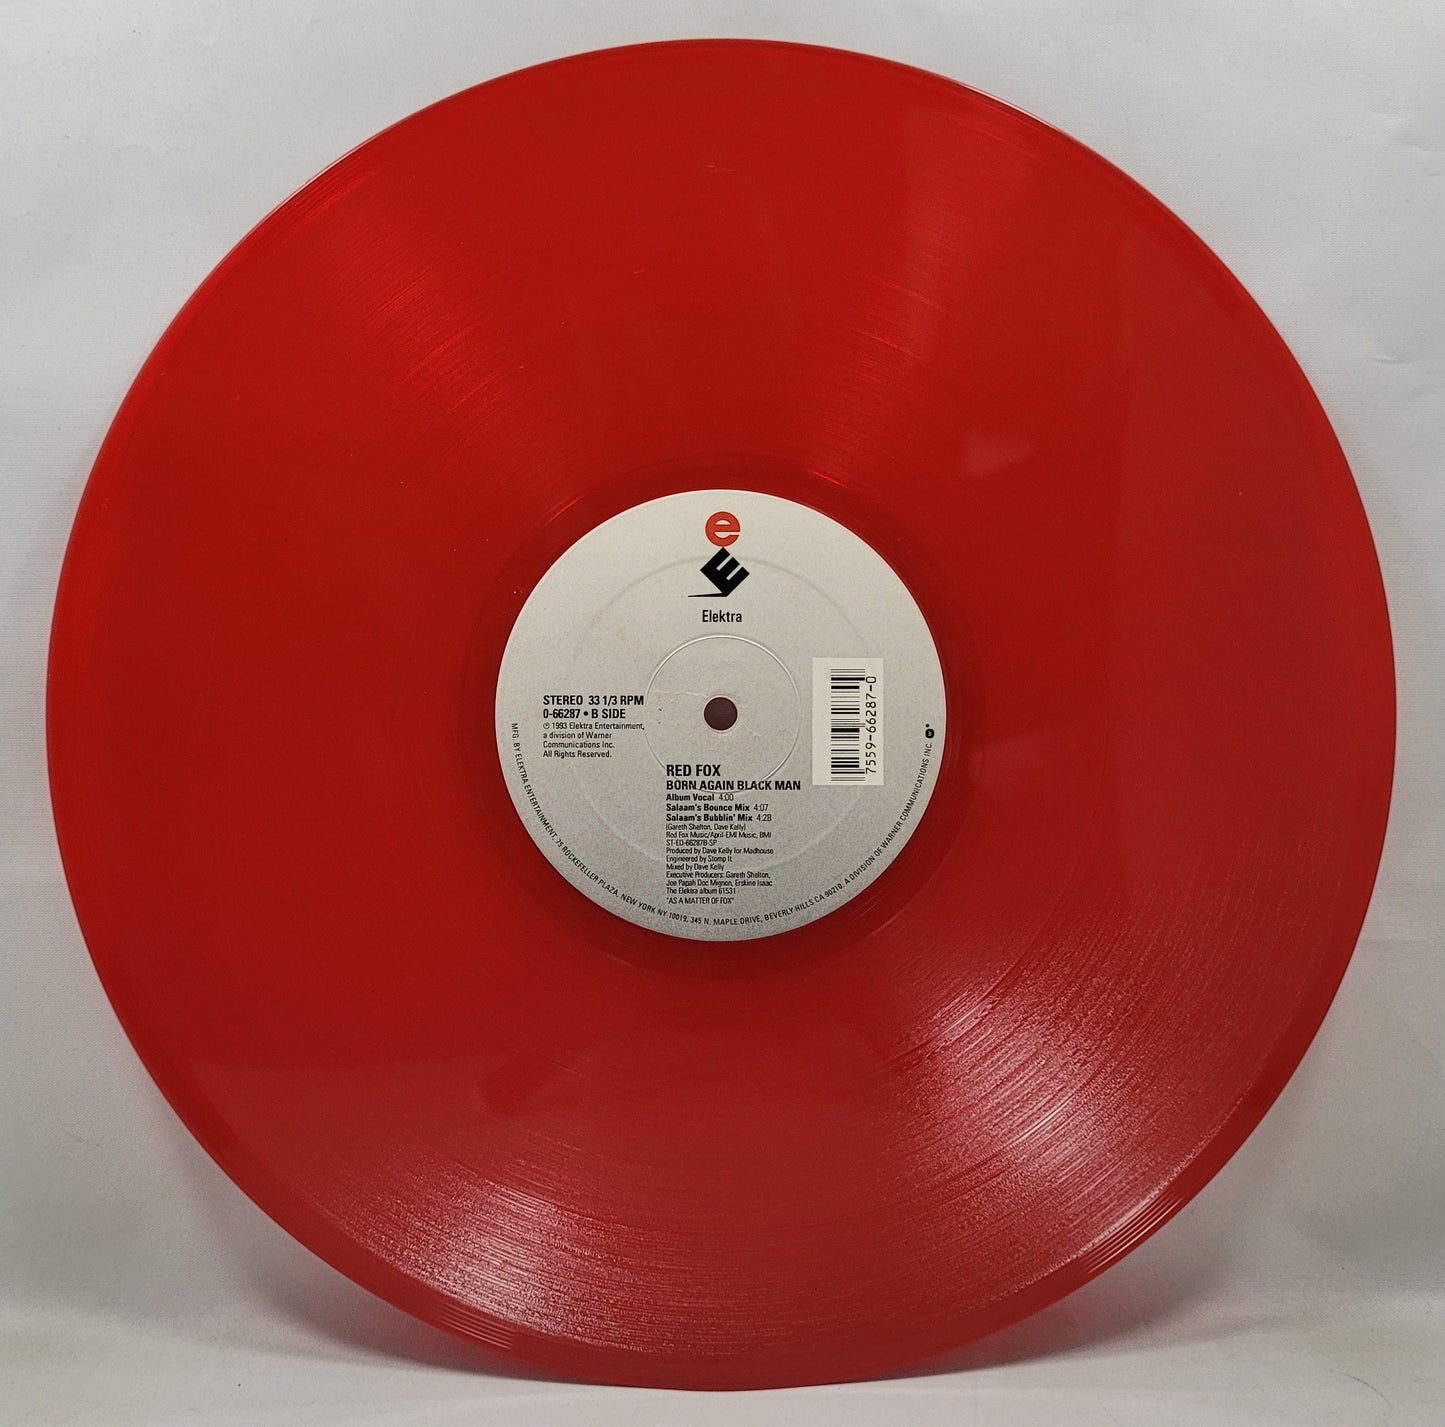 Red Fox - Dem a Murderer [Red Color] [Vinyl Record 12" Single]